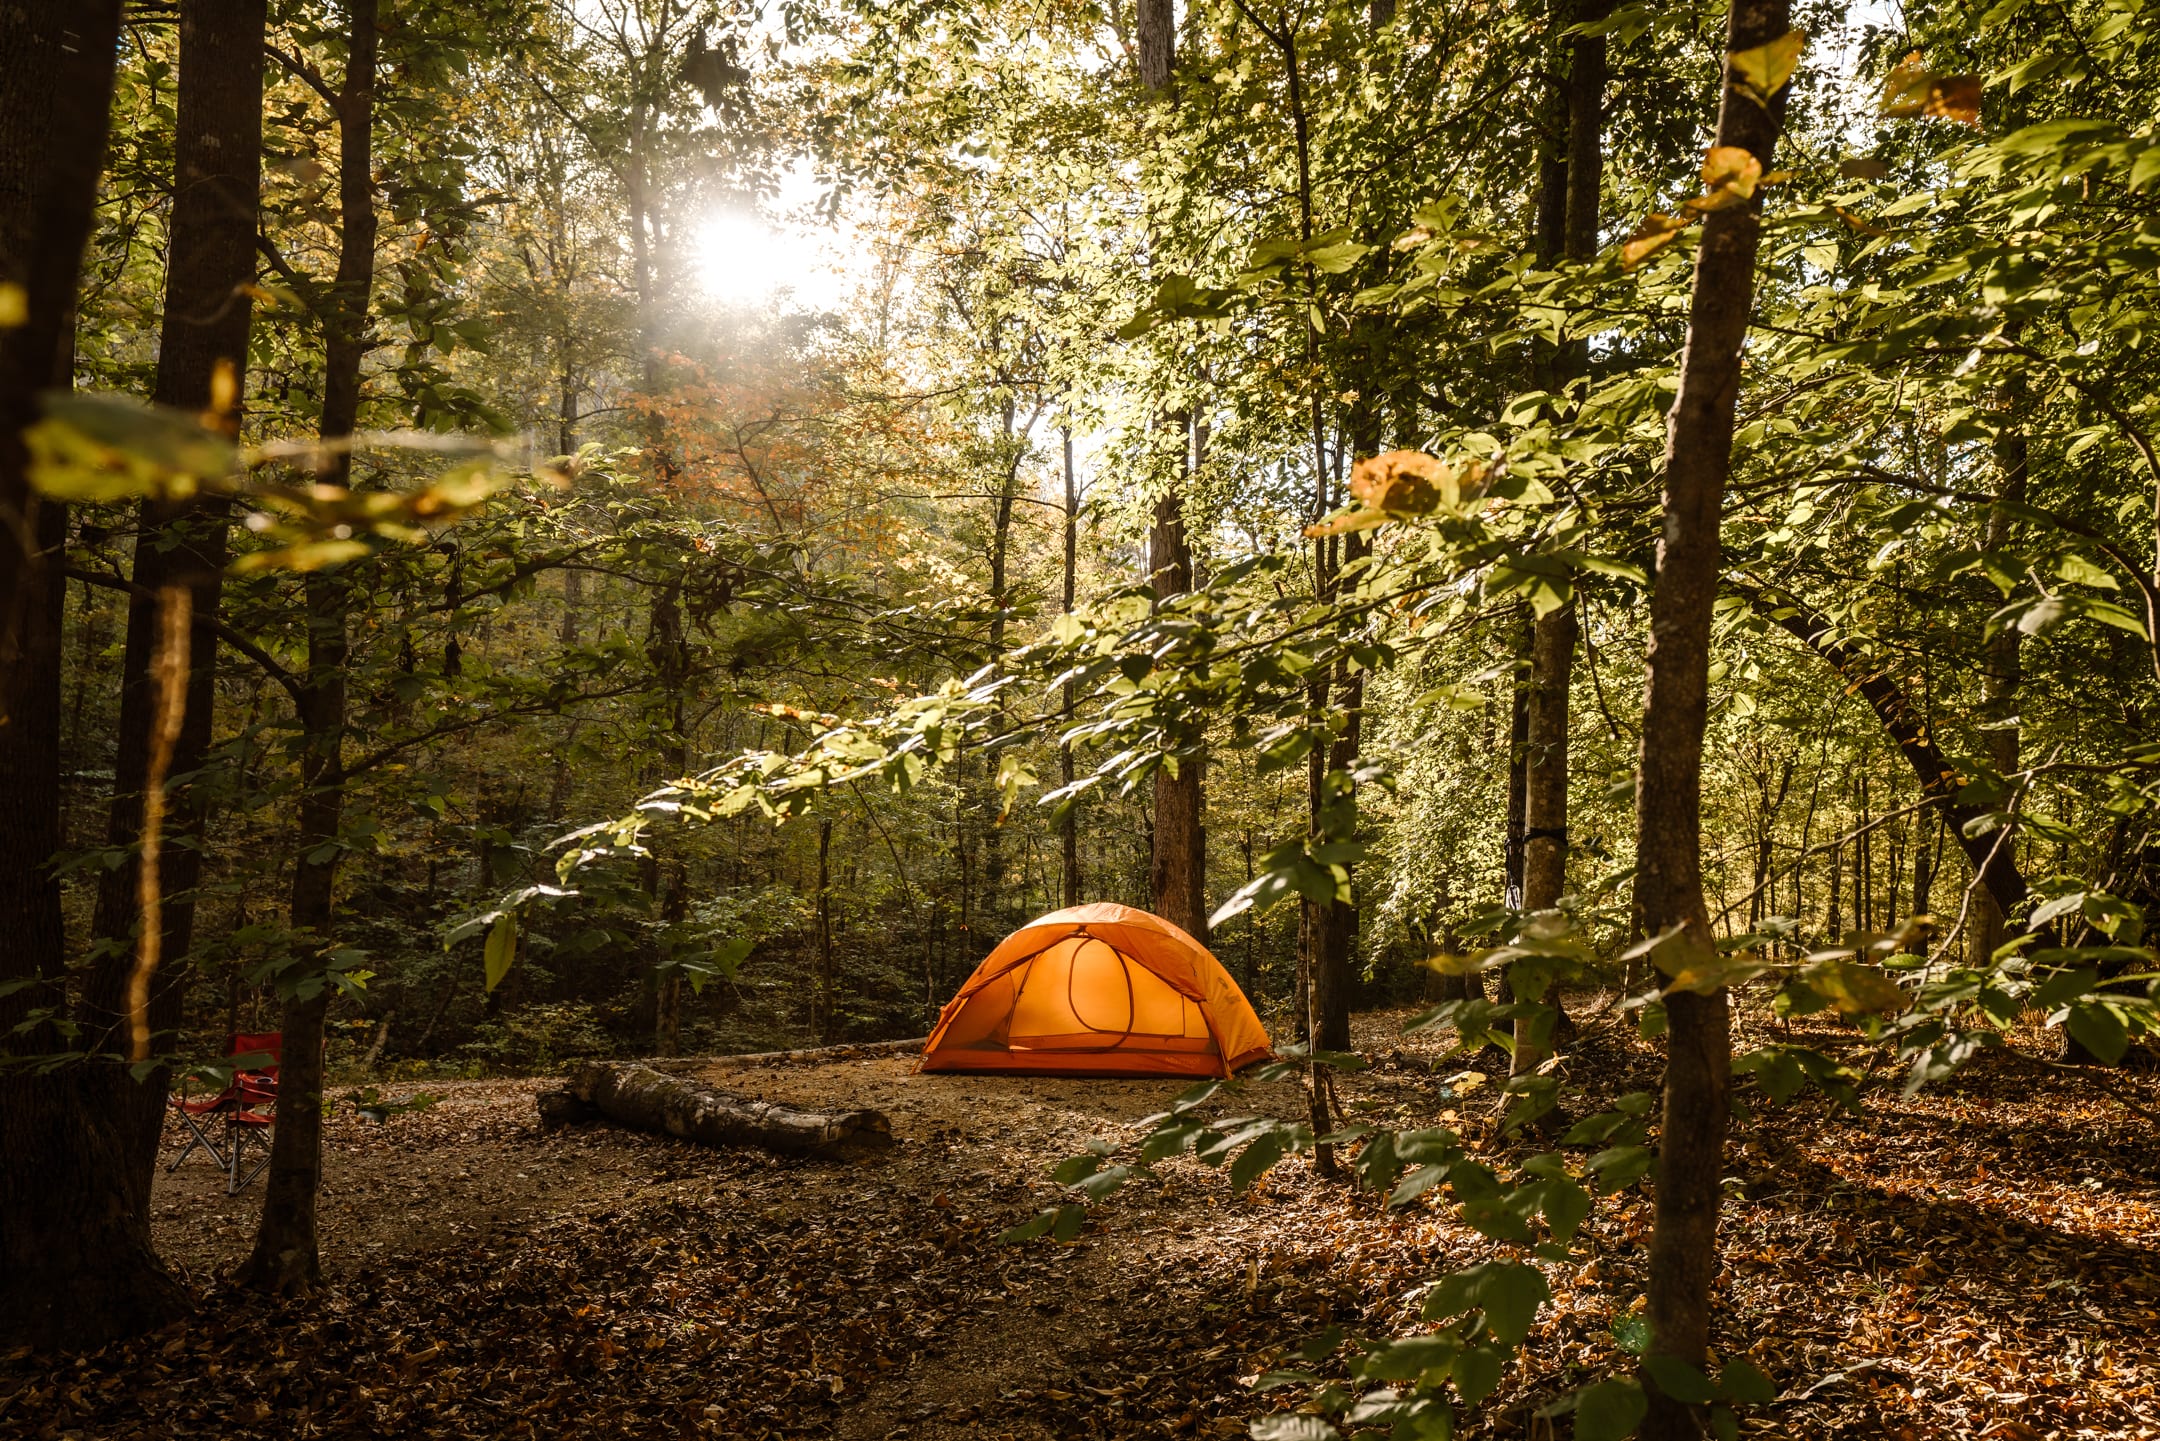 The tent sites are nestled in the forest and surrounded by trees.